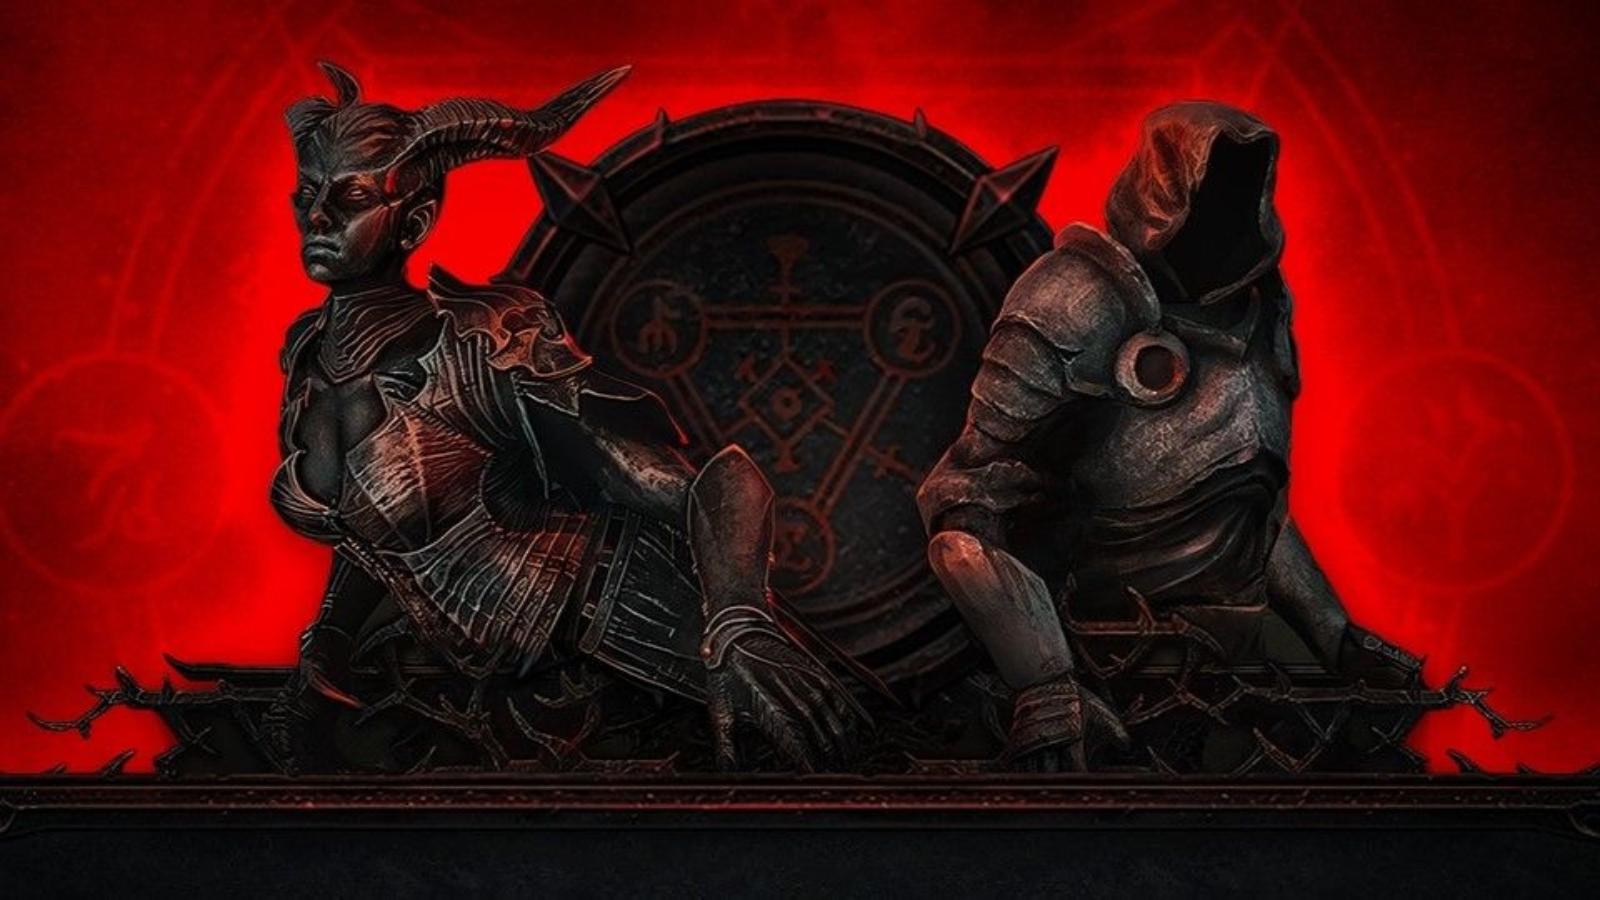 Promotional image for Diablo 4 Season 4 Campfire Chat showing Inarius and a demon